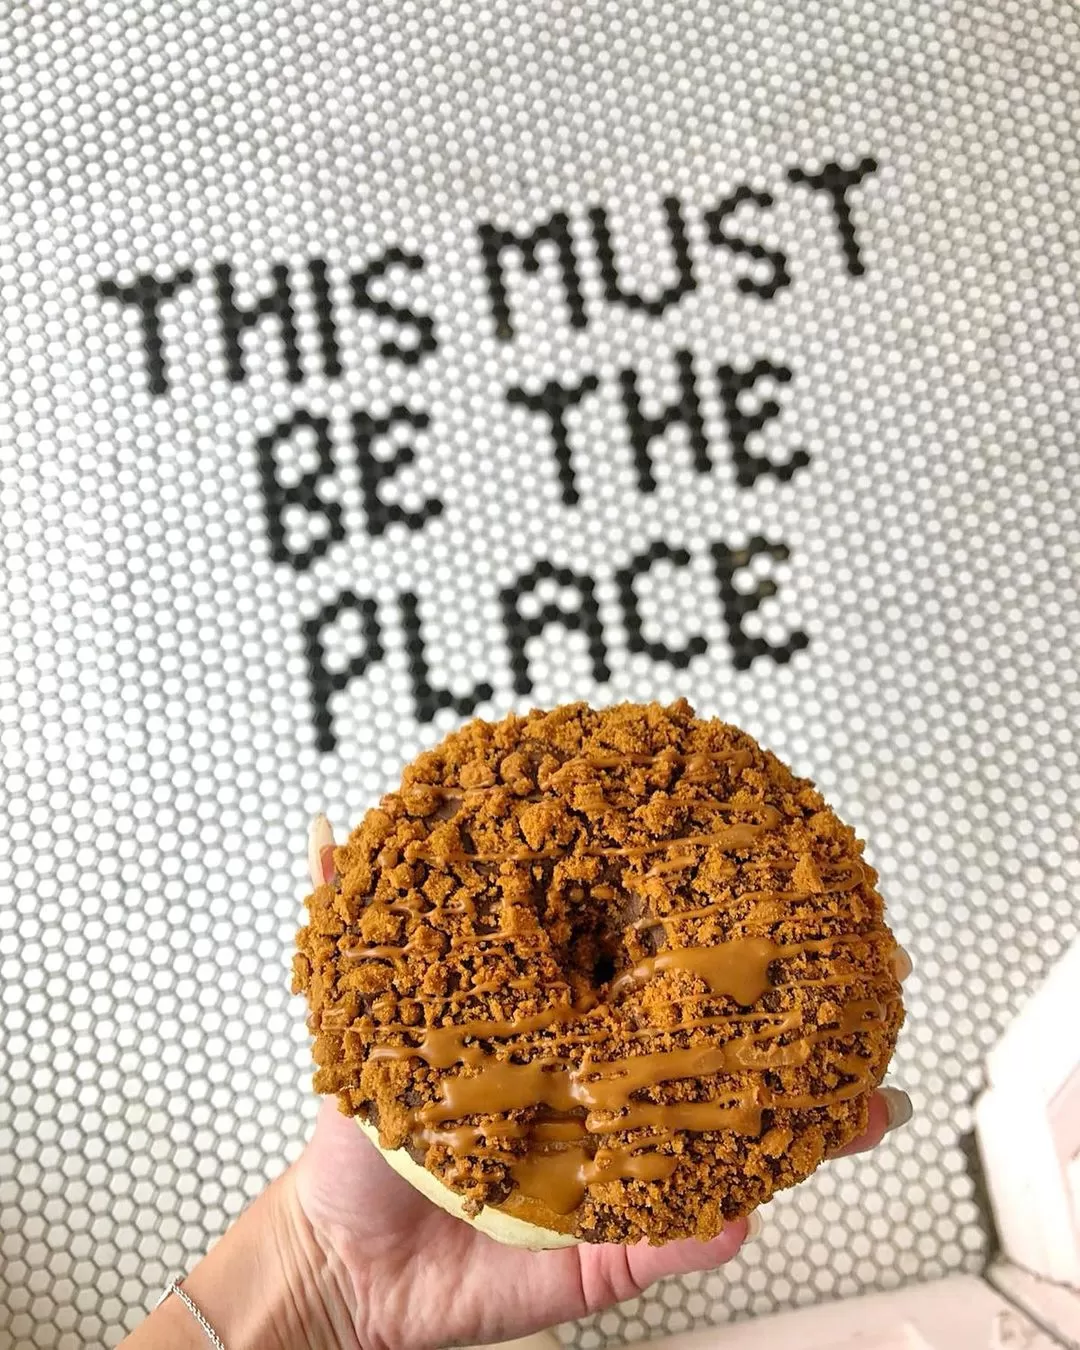 This must be the place tiled floor and donut